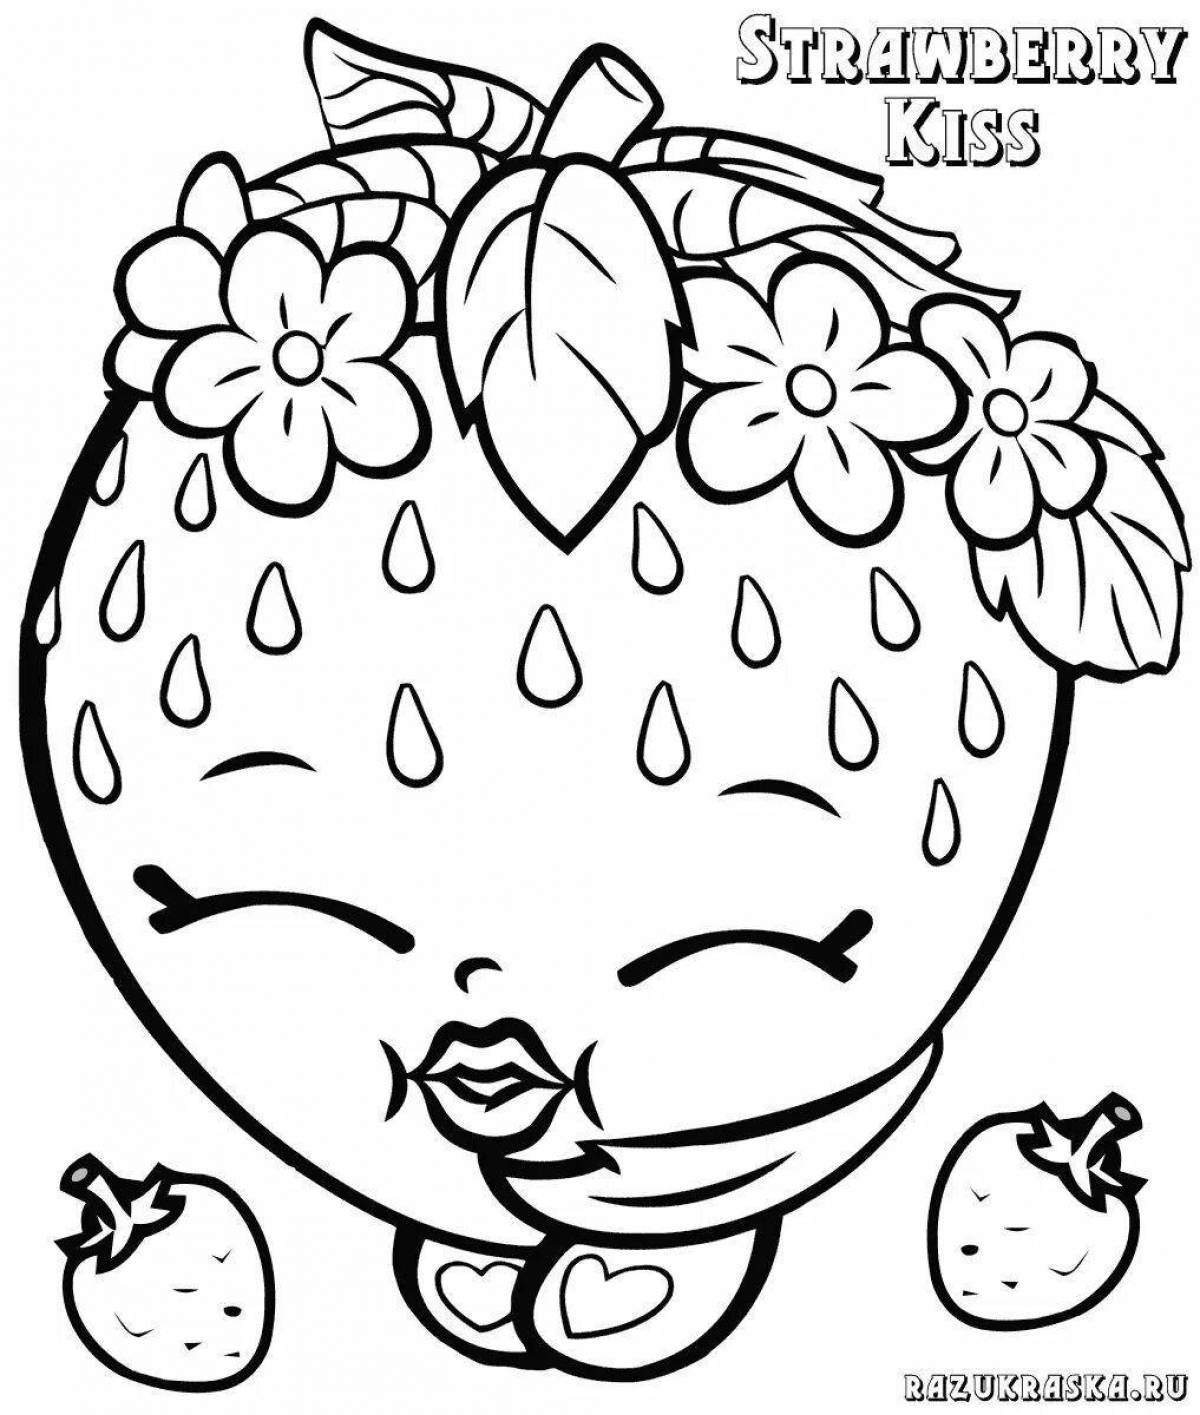 Joyful strawberry coloring book for kids